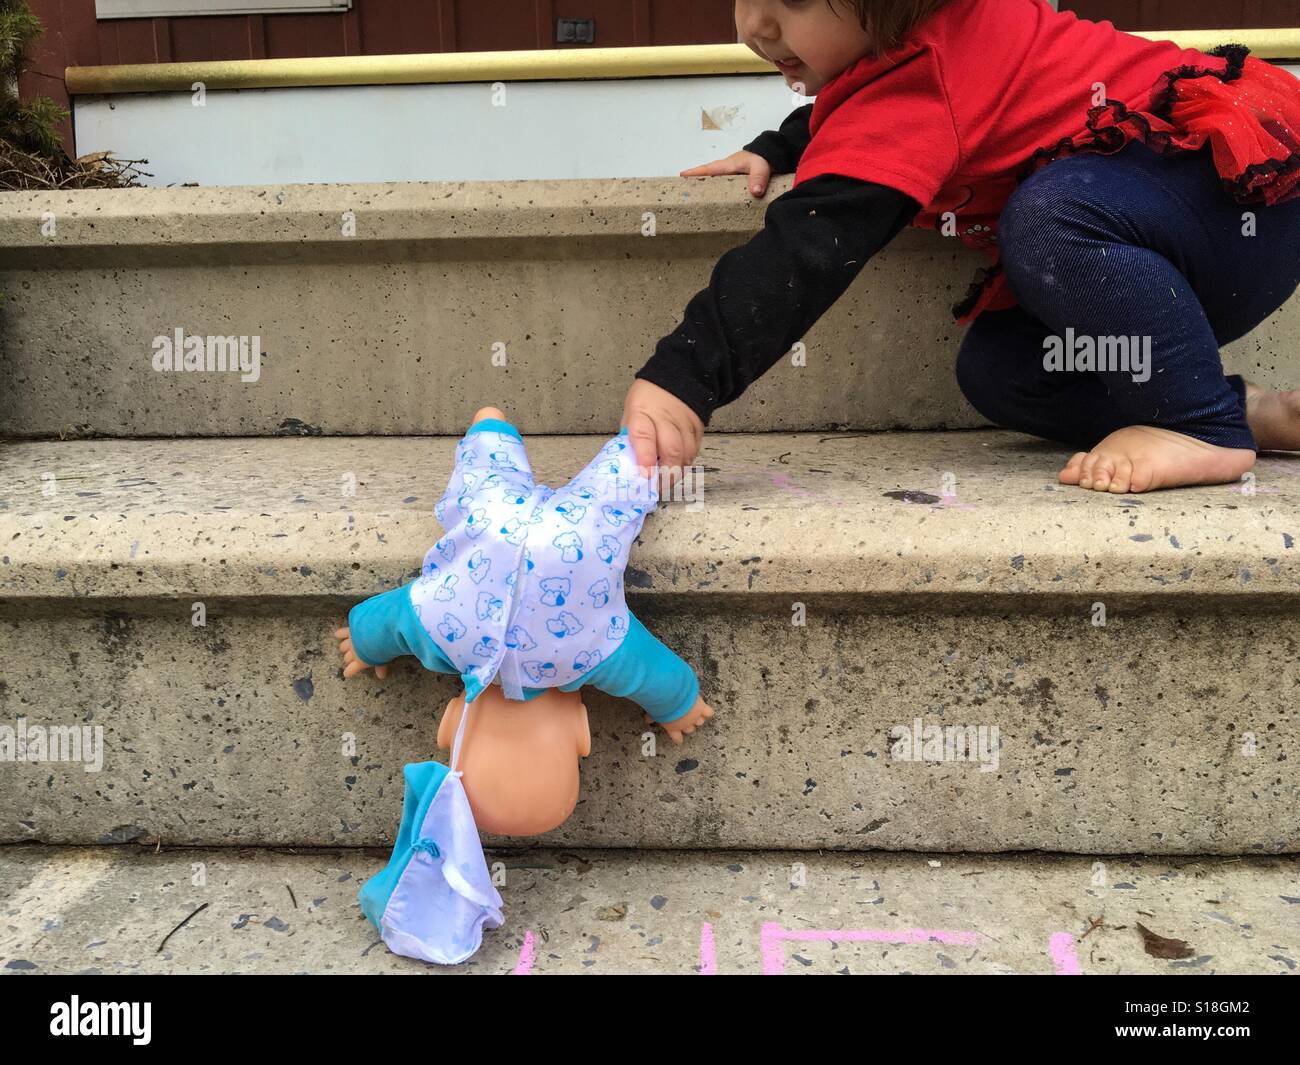 A toddler rescues her doll from falling down the stairs. Stock Photo